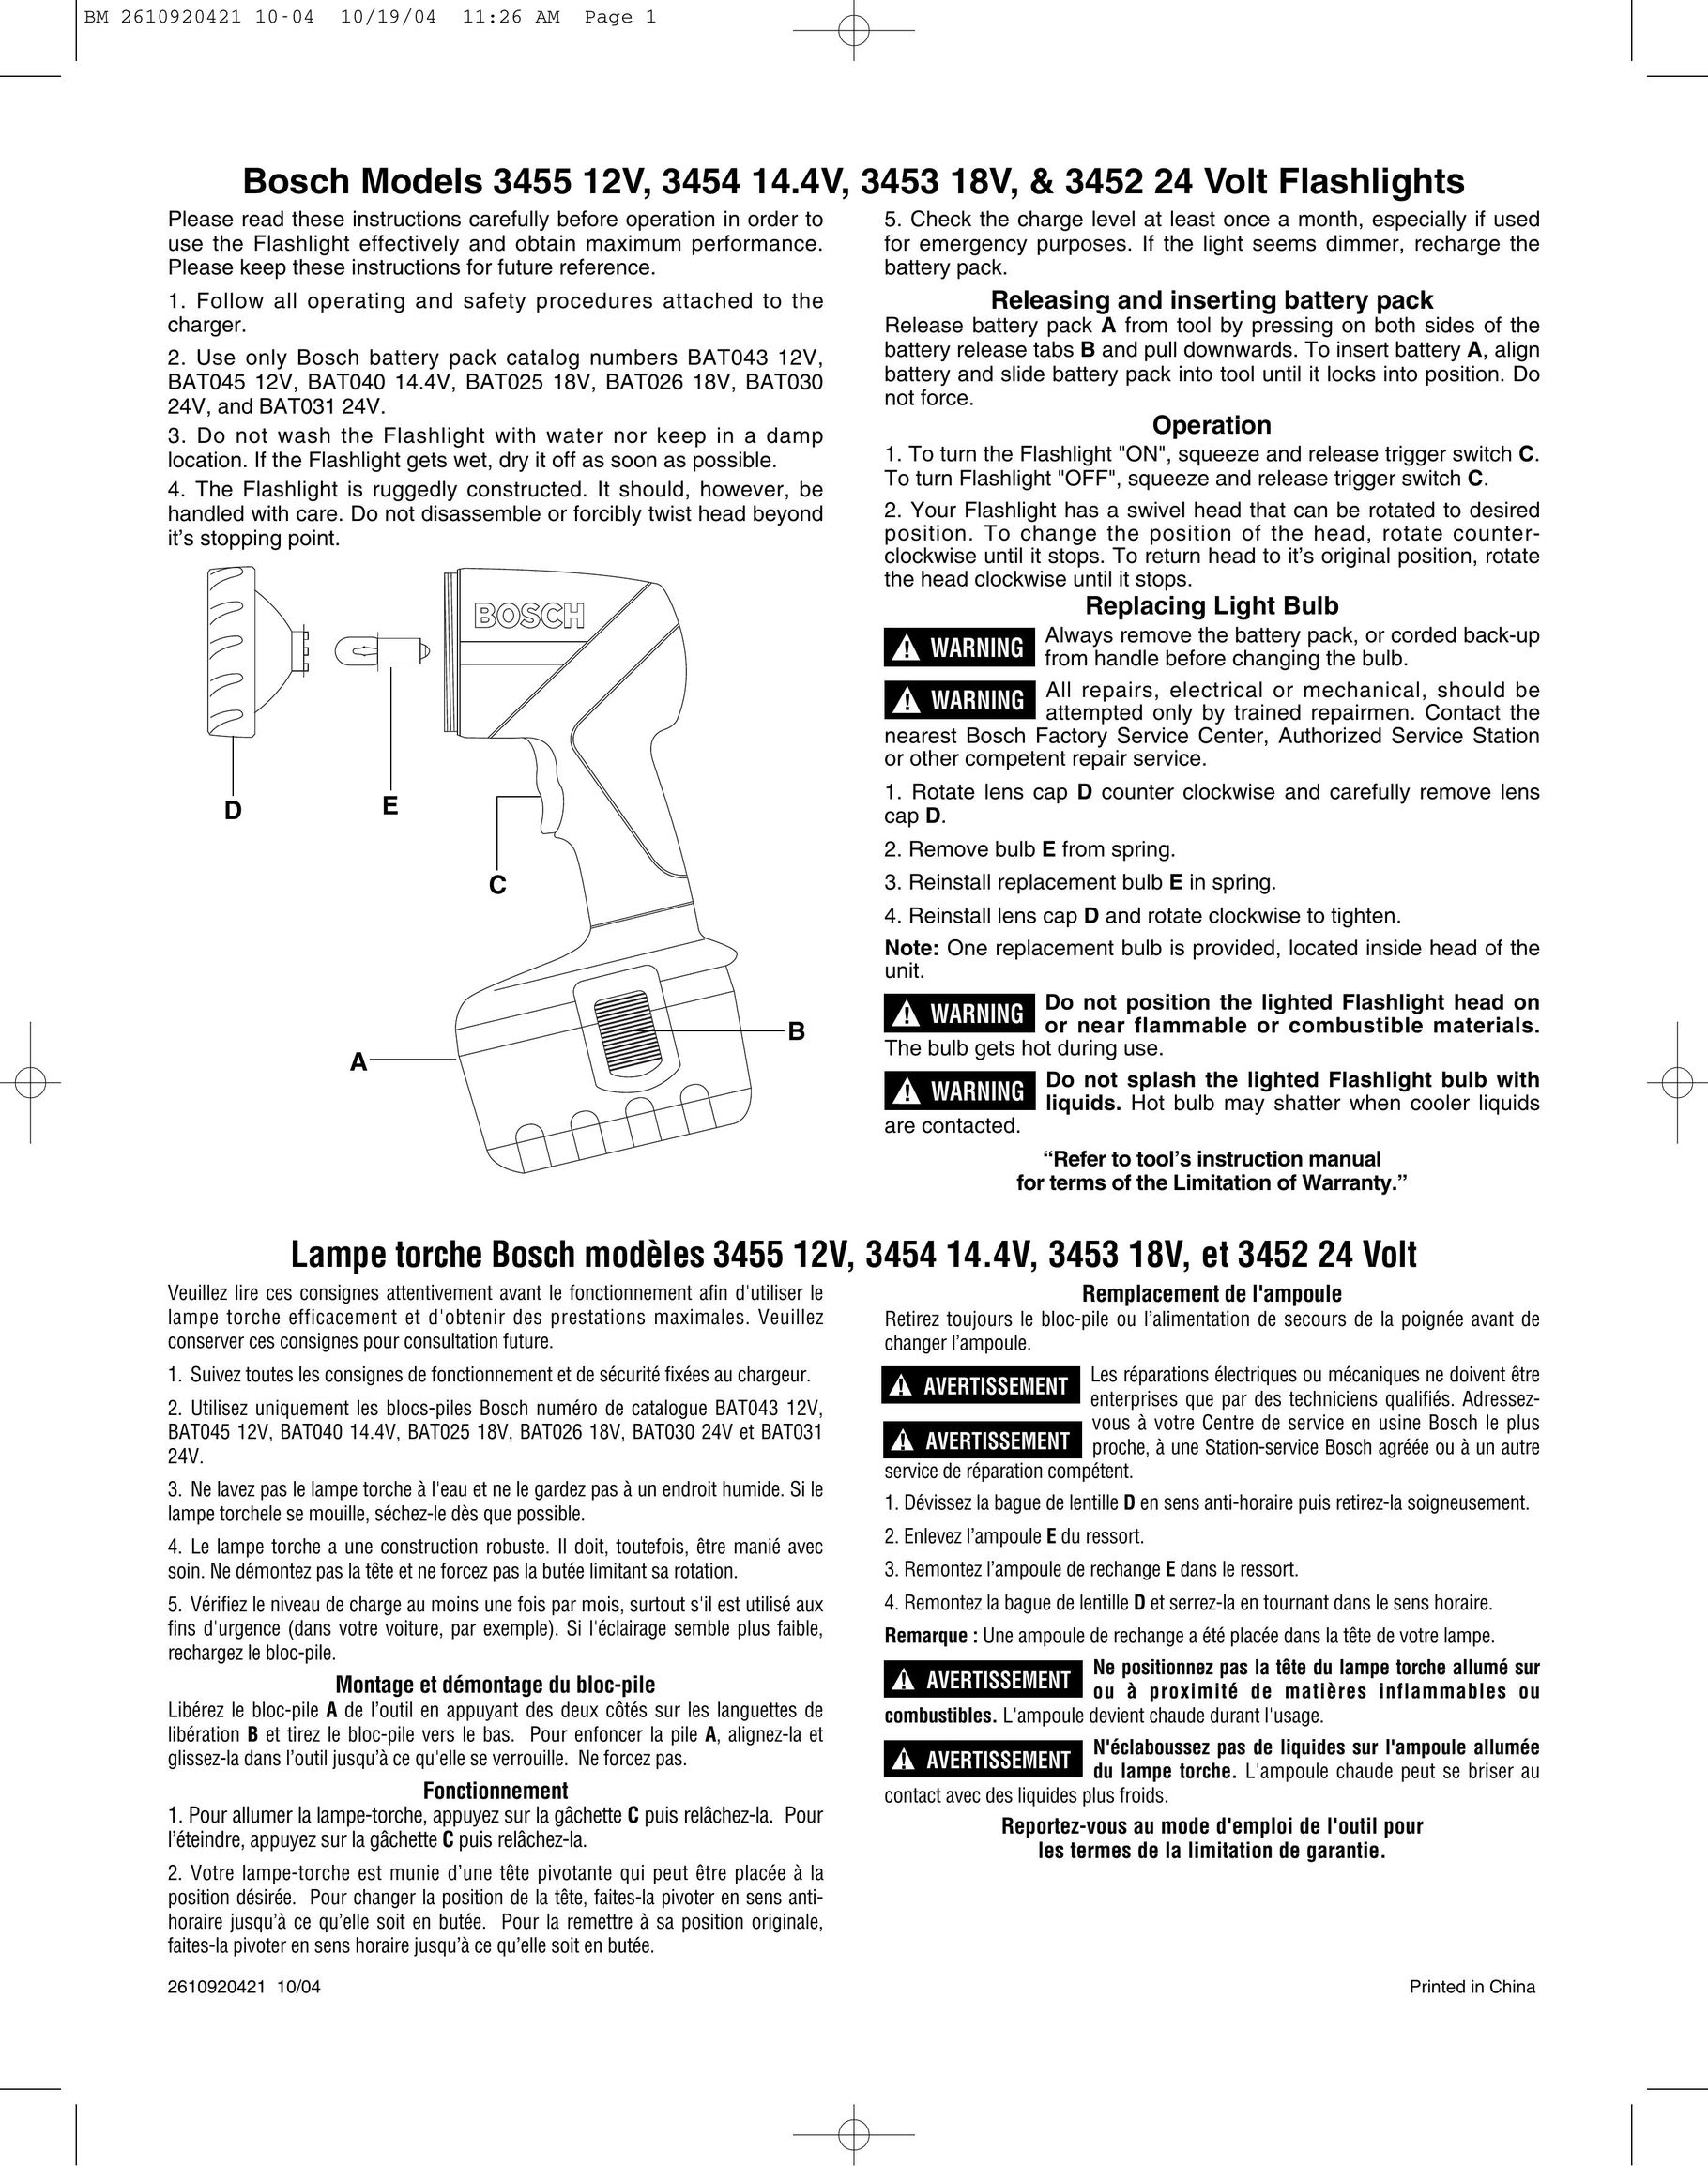 Bosch Appliances 3454 14.4V Home Safety Product User Manual